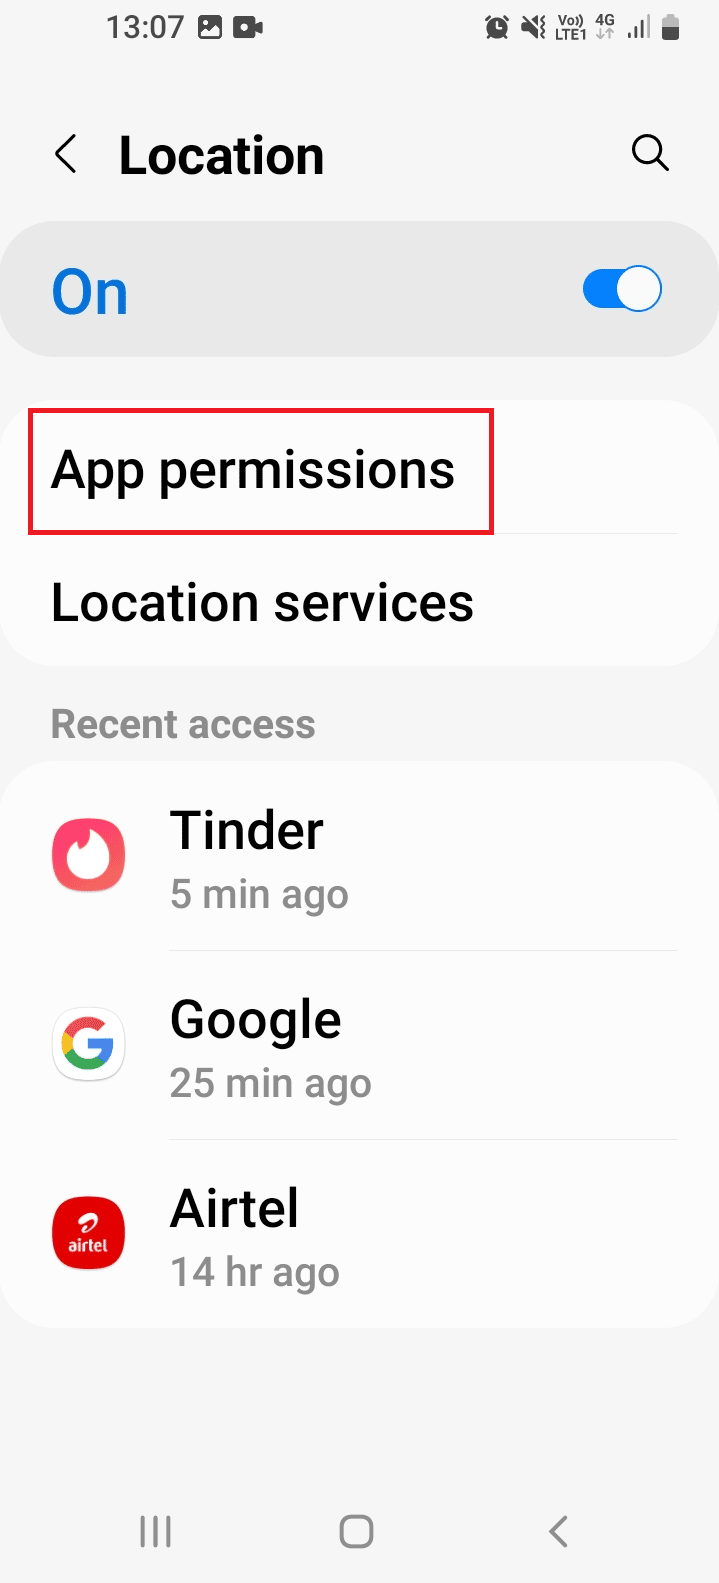 Toggle on the Location option and tap on the Tinder app on the App permissions tab